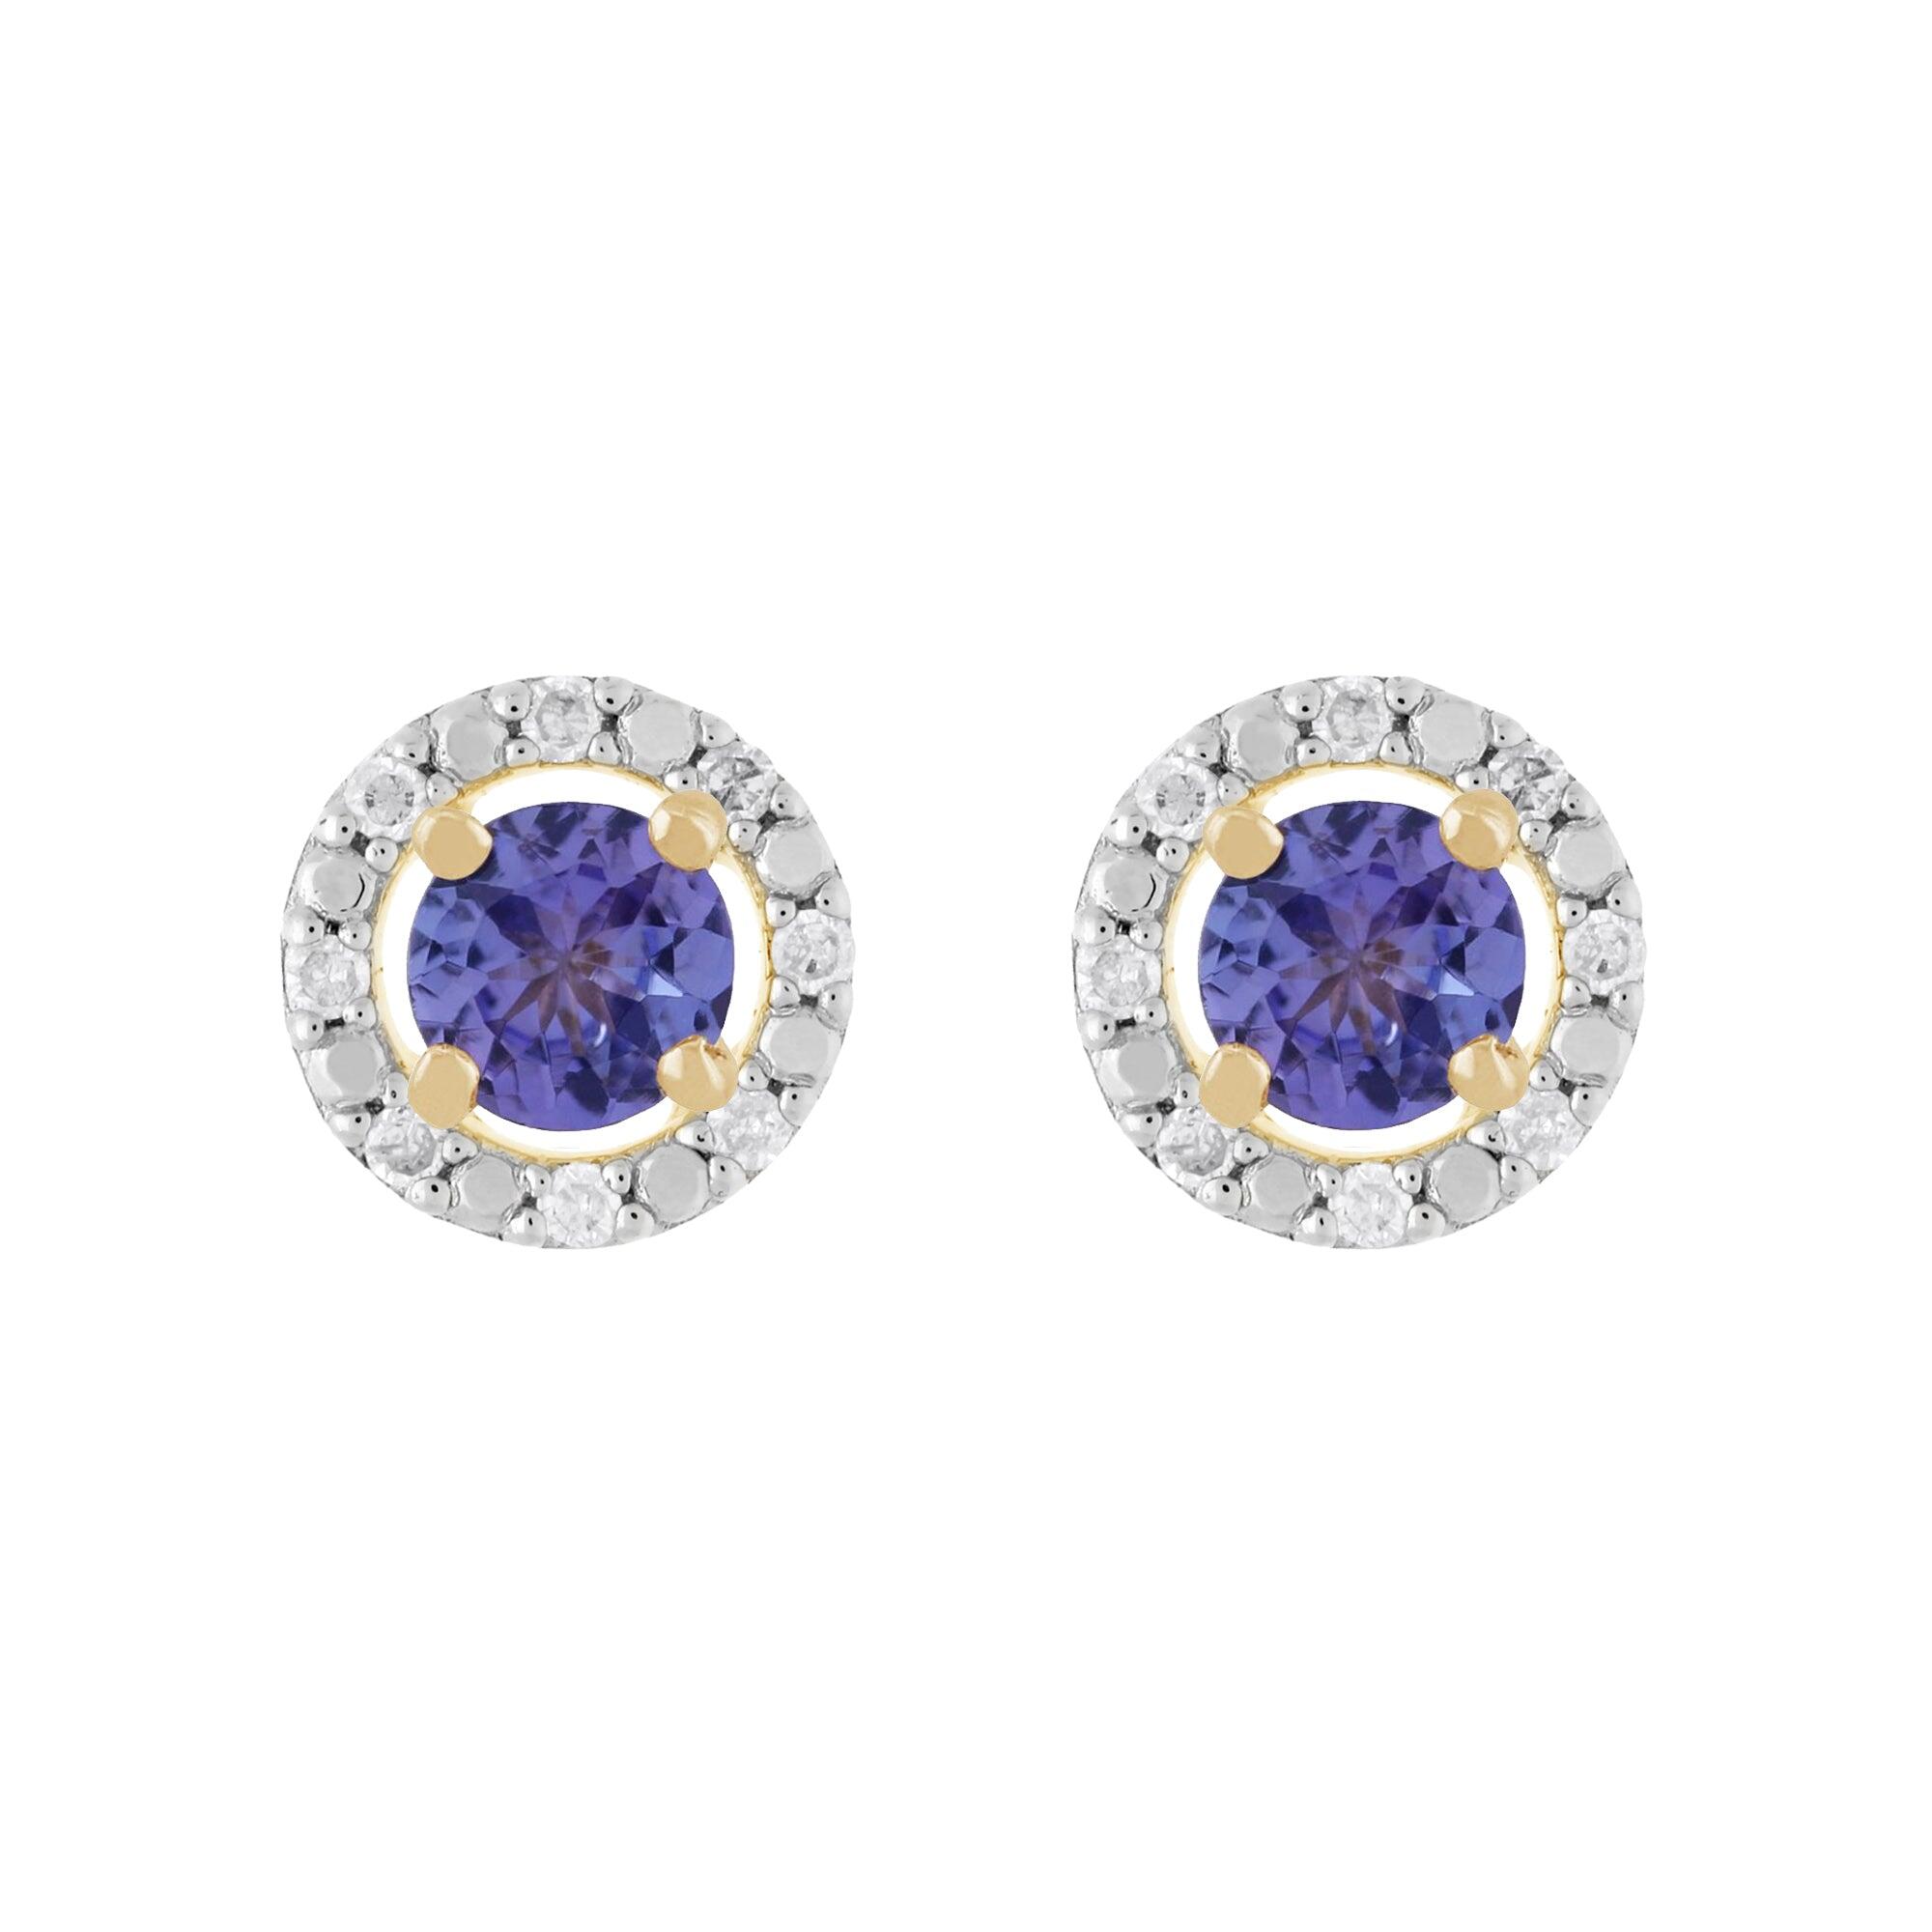 Classic Round Tanzanite Stud Earrings with Detachable Diamond Round Earrings Jacket Set in 9ct Yellow Gold